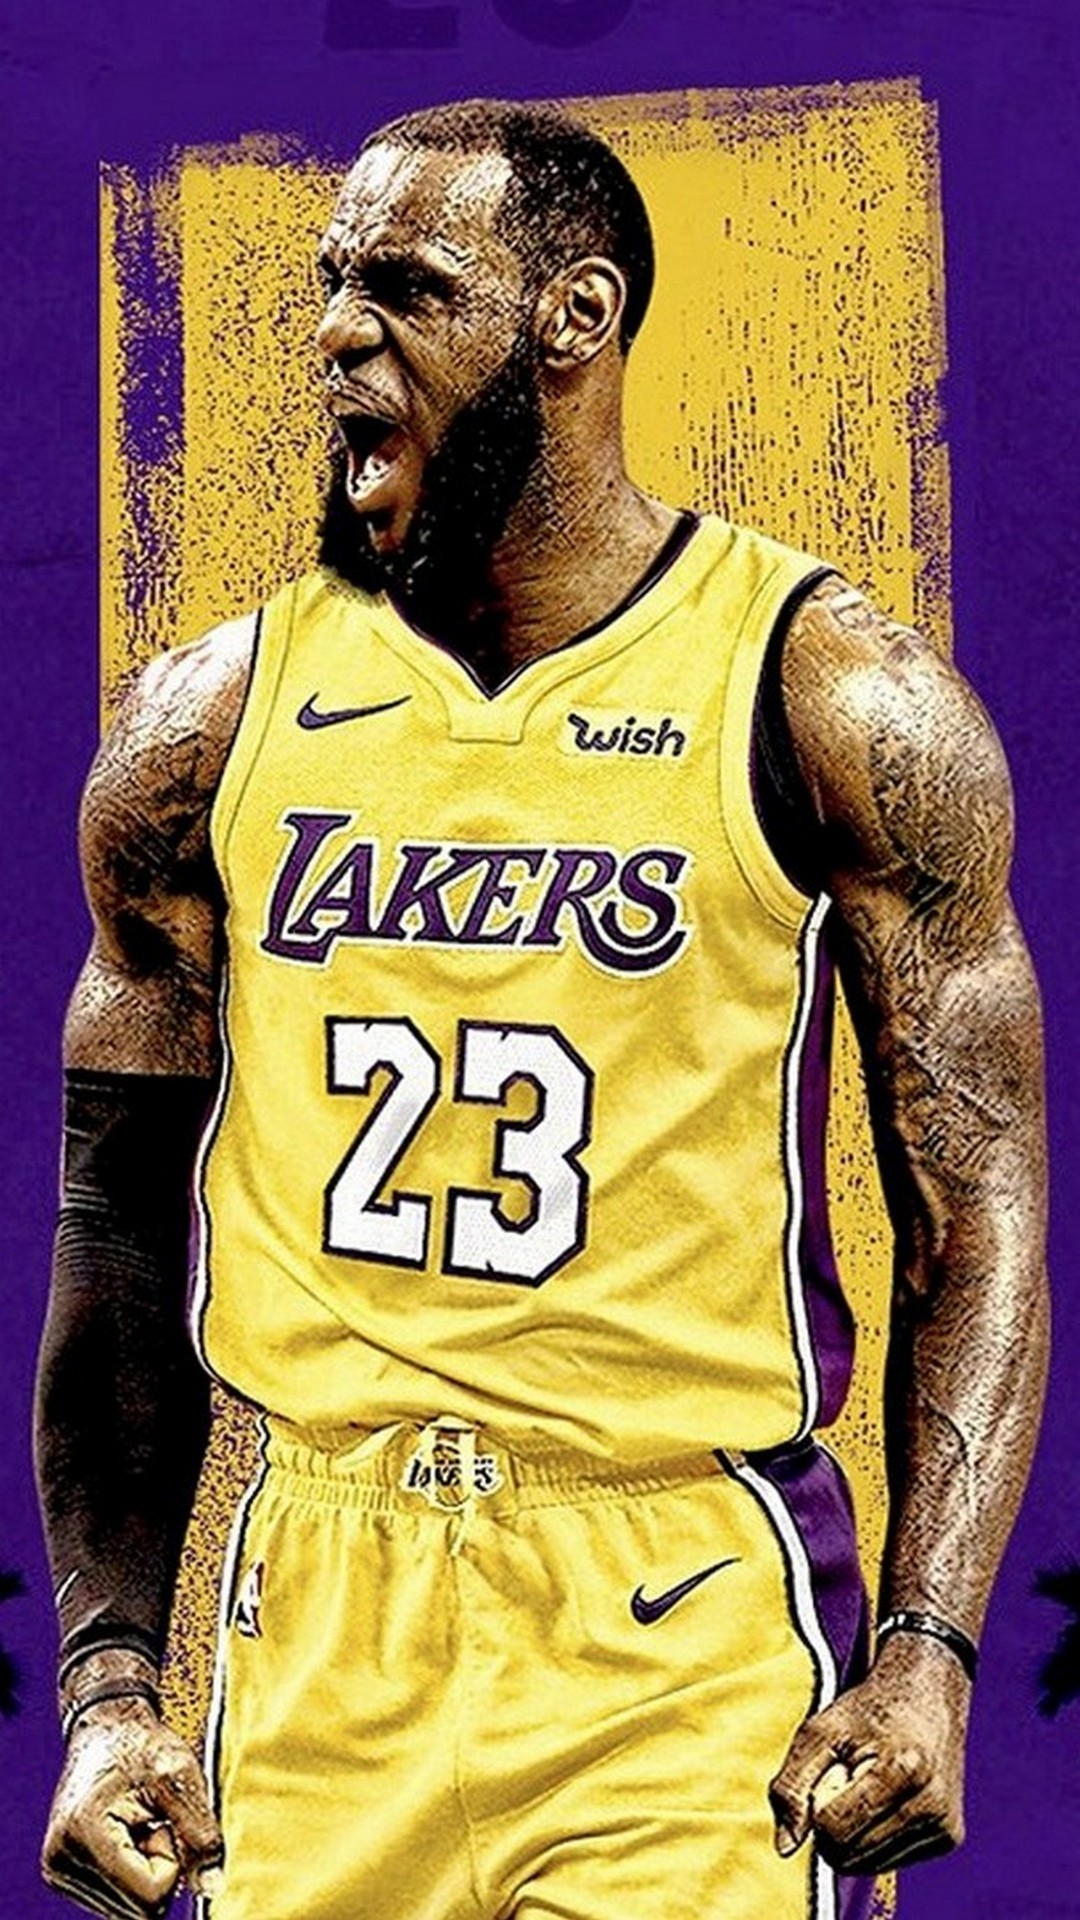 Wallpaper Lebron James Lakers iPhone With high-resolution 1080X1920 pixel. You can use this wallpaper for your iPhone 5, 6, 7, 8, X backgrounds, Mobile Screensaver, or iPad Lock Screen